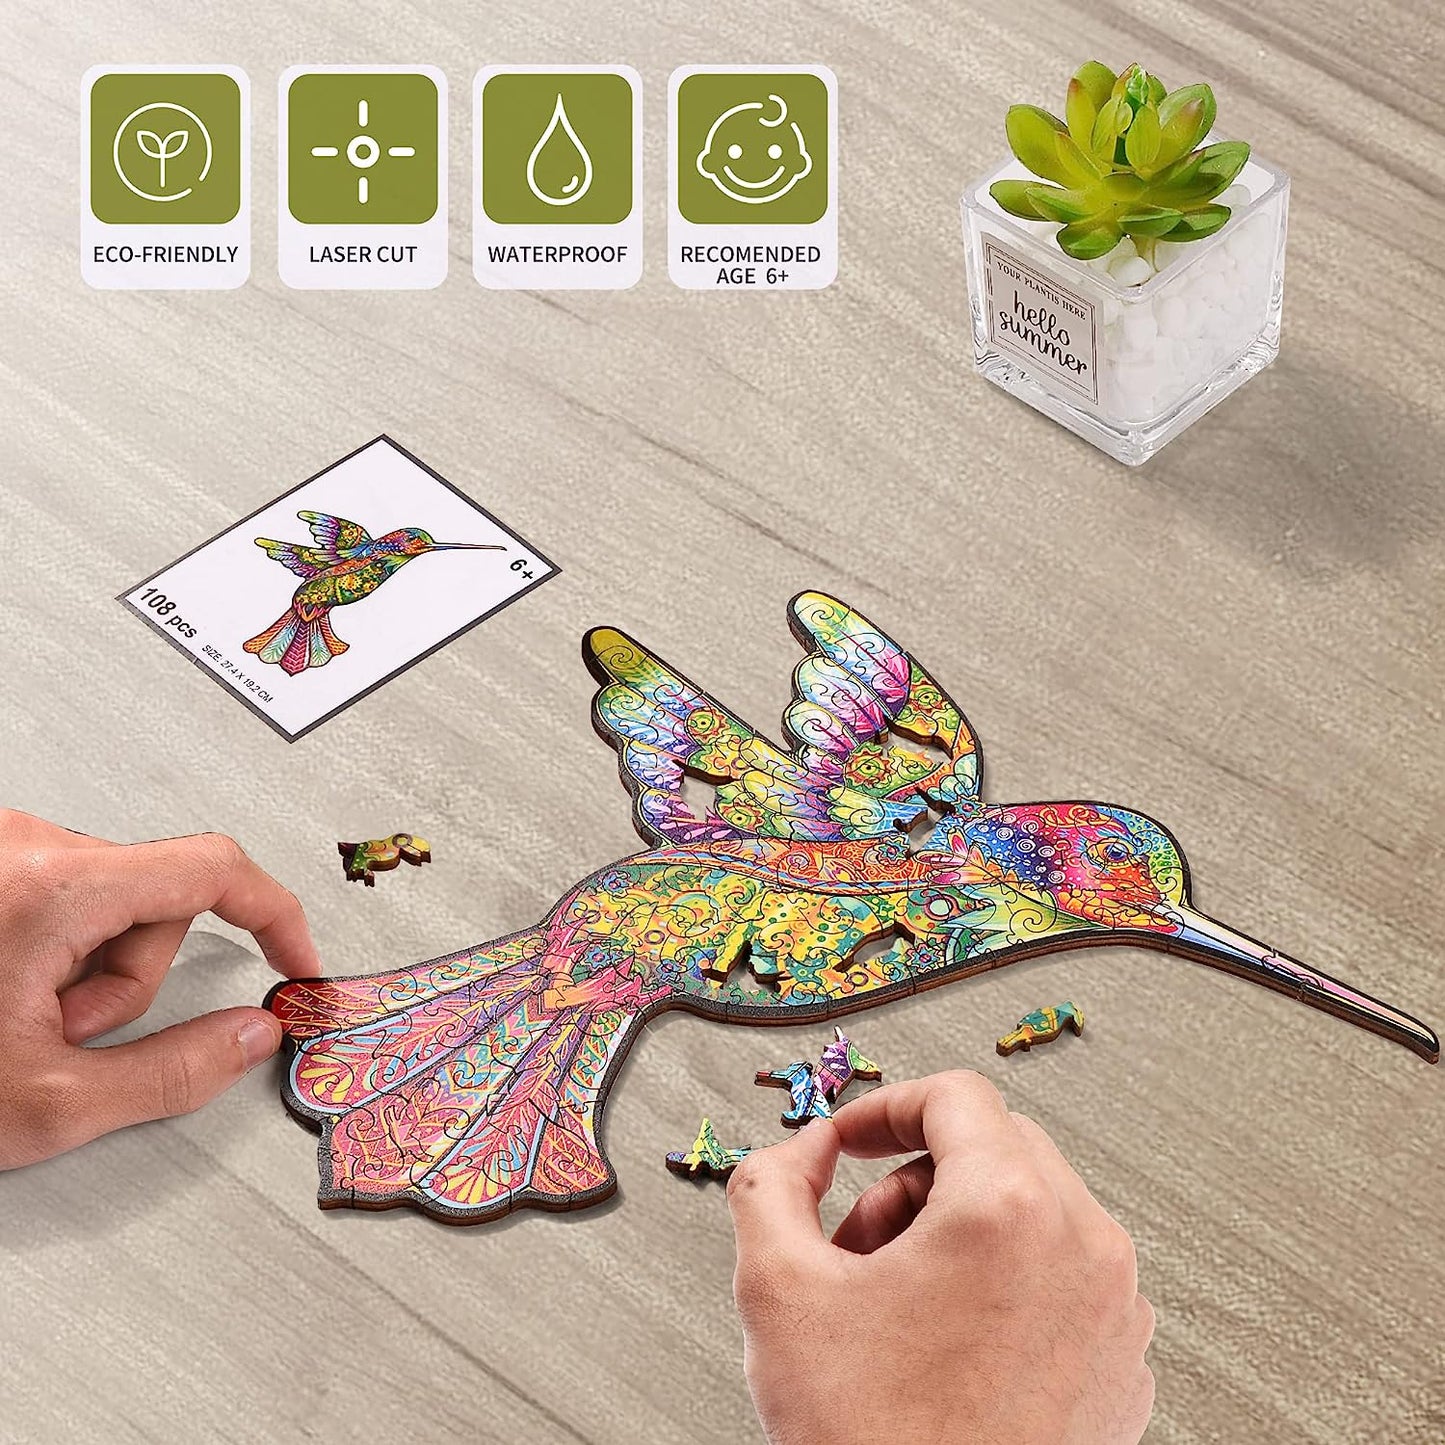 Hummingbird Wooden Puzzle for Adults, 108 PCS Animal Unique Shaped Wooden Jigsaw Puzzles - 7.55 x 10.78 Inches, Creative Gift for Teenagers and Adults